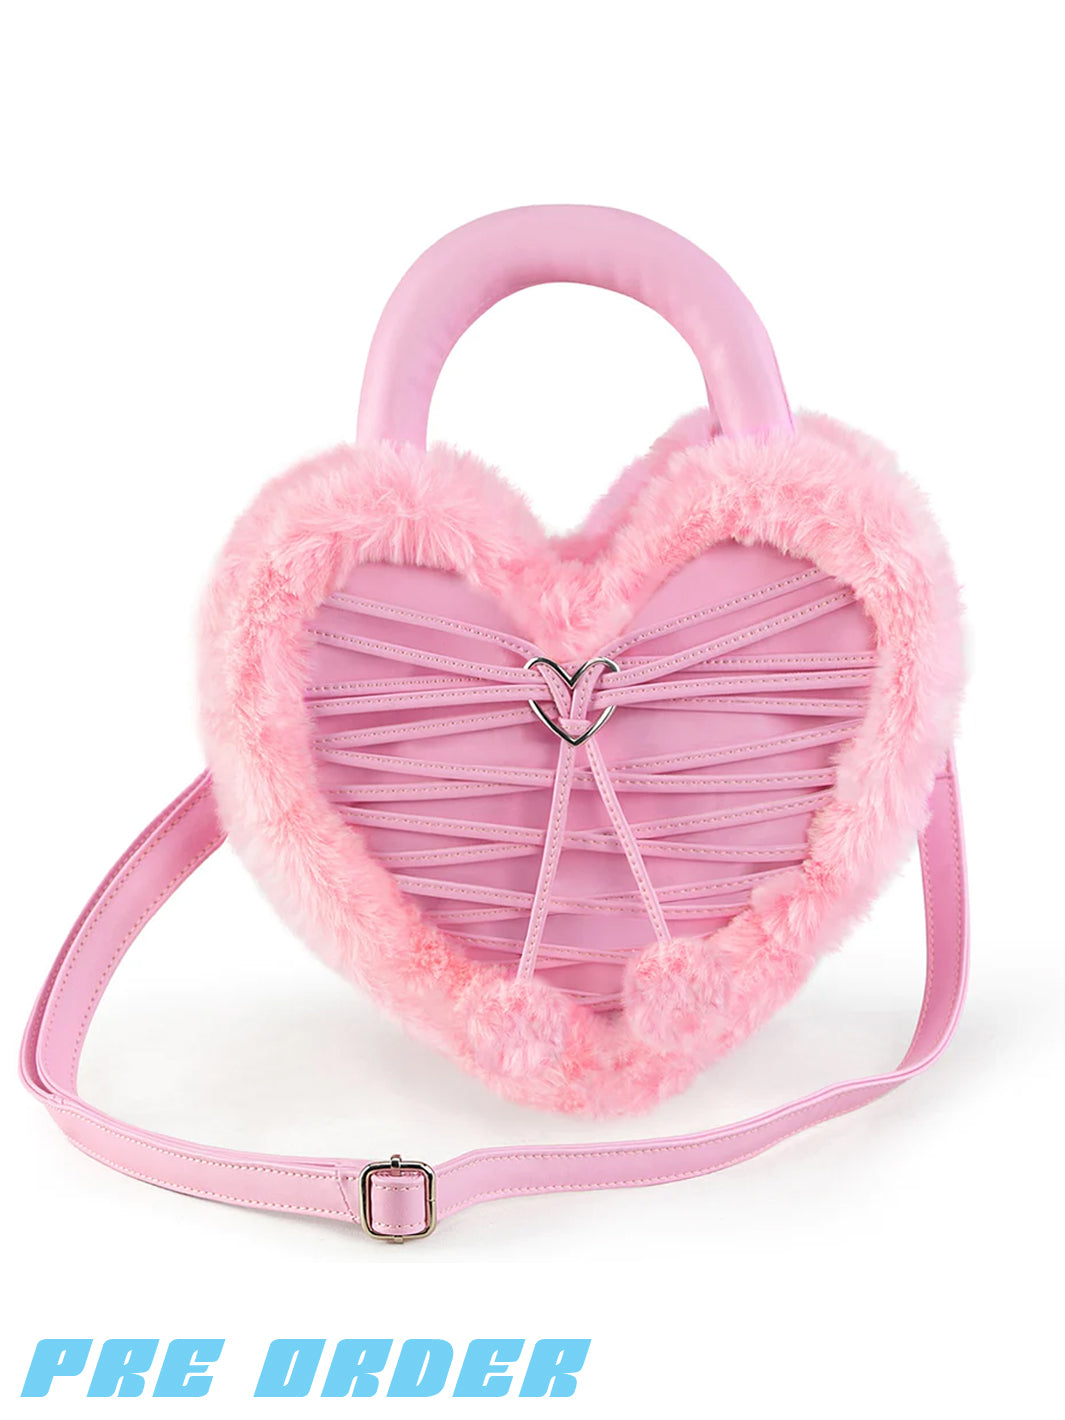 FAUX HEART SHAPED PURSE - PINK ✰ PRE ORDER ✰